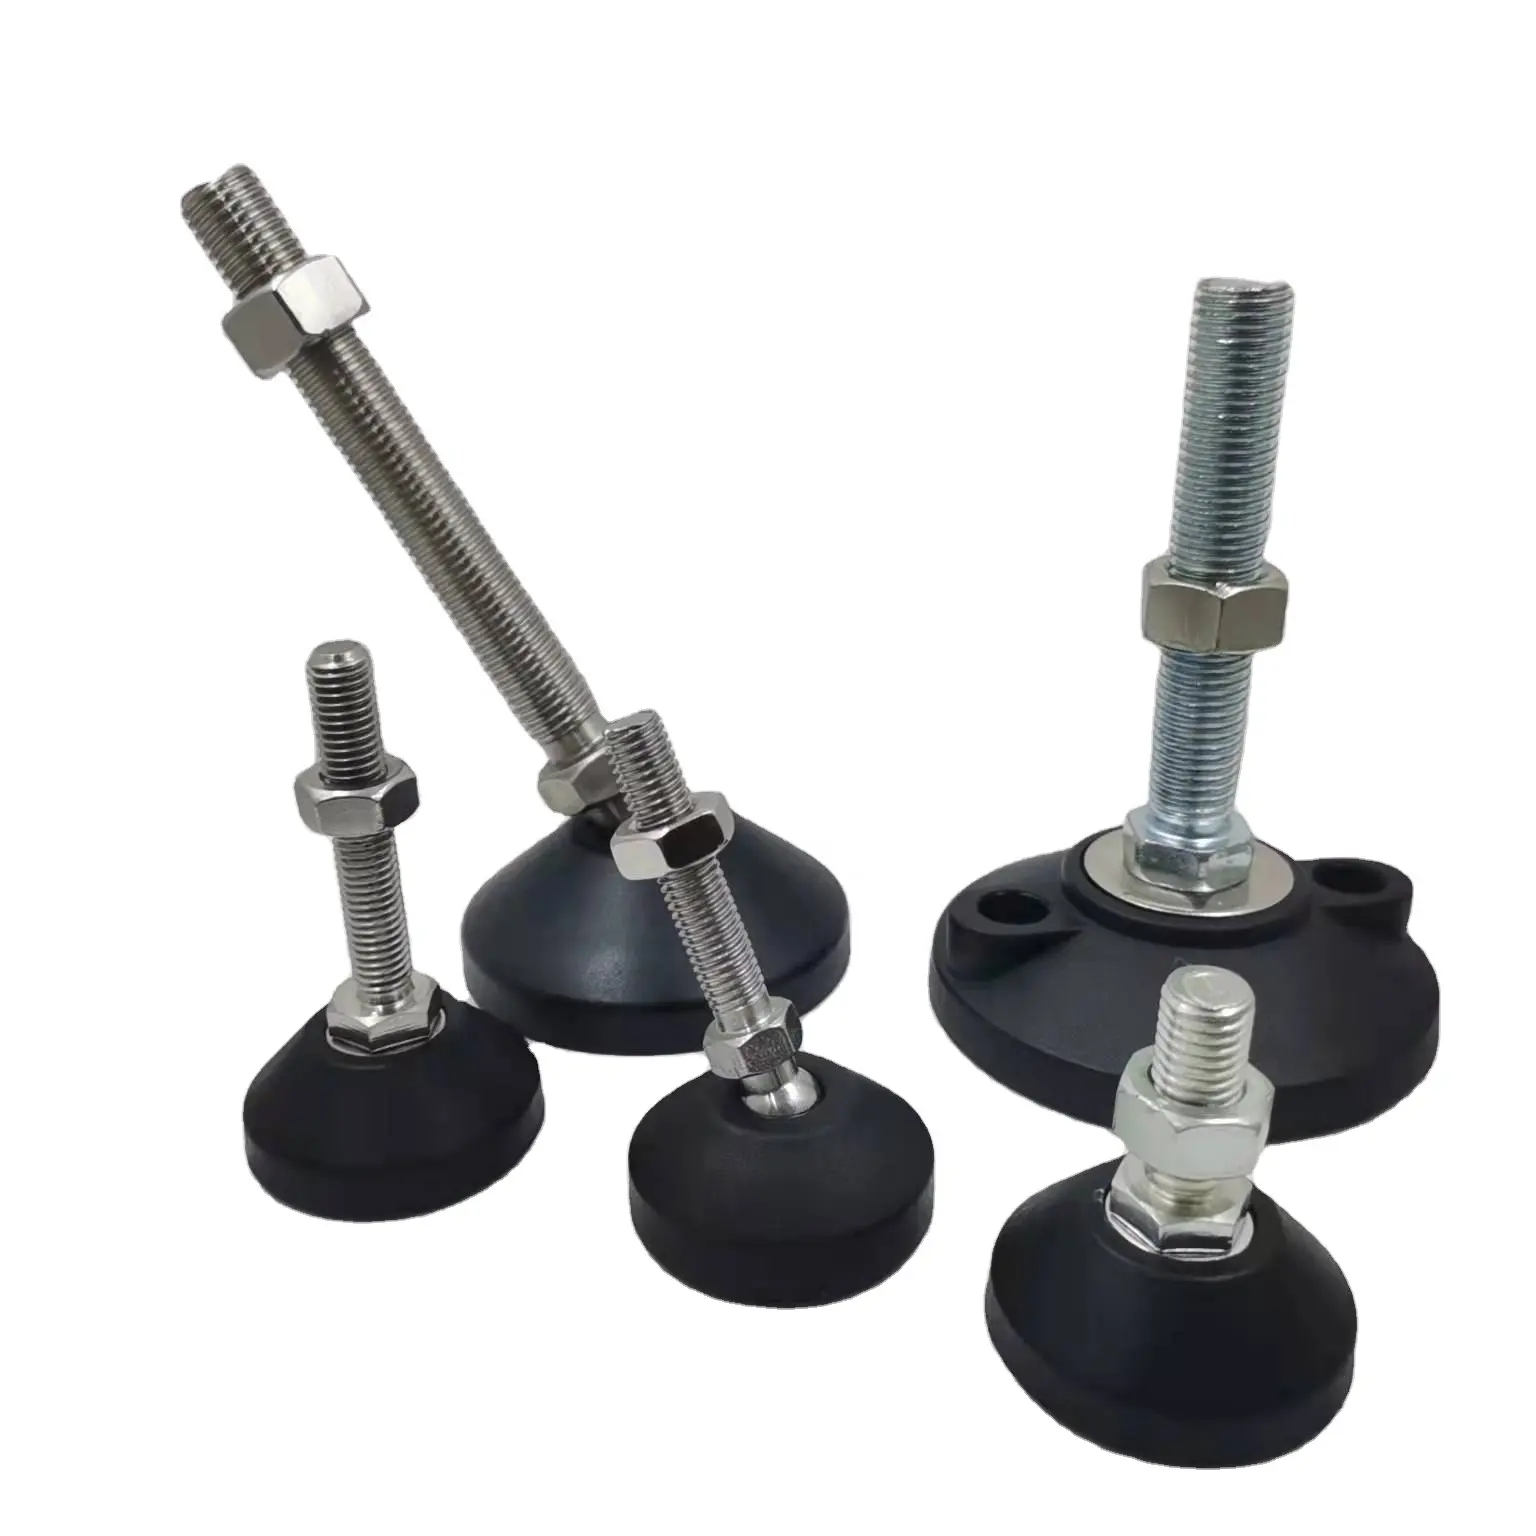 M6/8/10/12/14/16/20/24/30 Thread Customized Shaft Industrial Leveling Foot Black adjustable feet with rubber pad